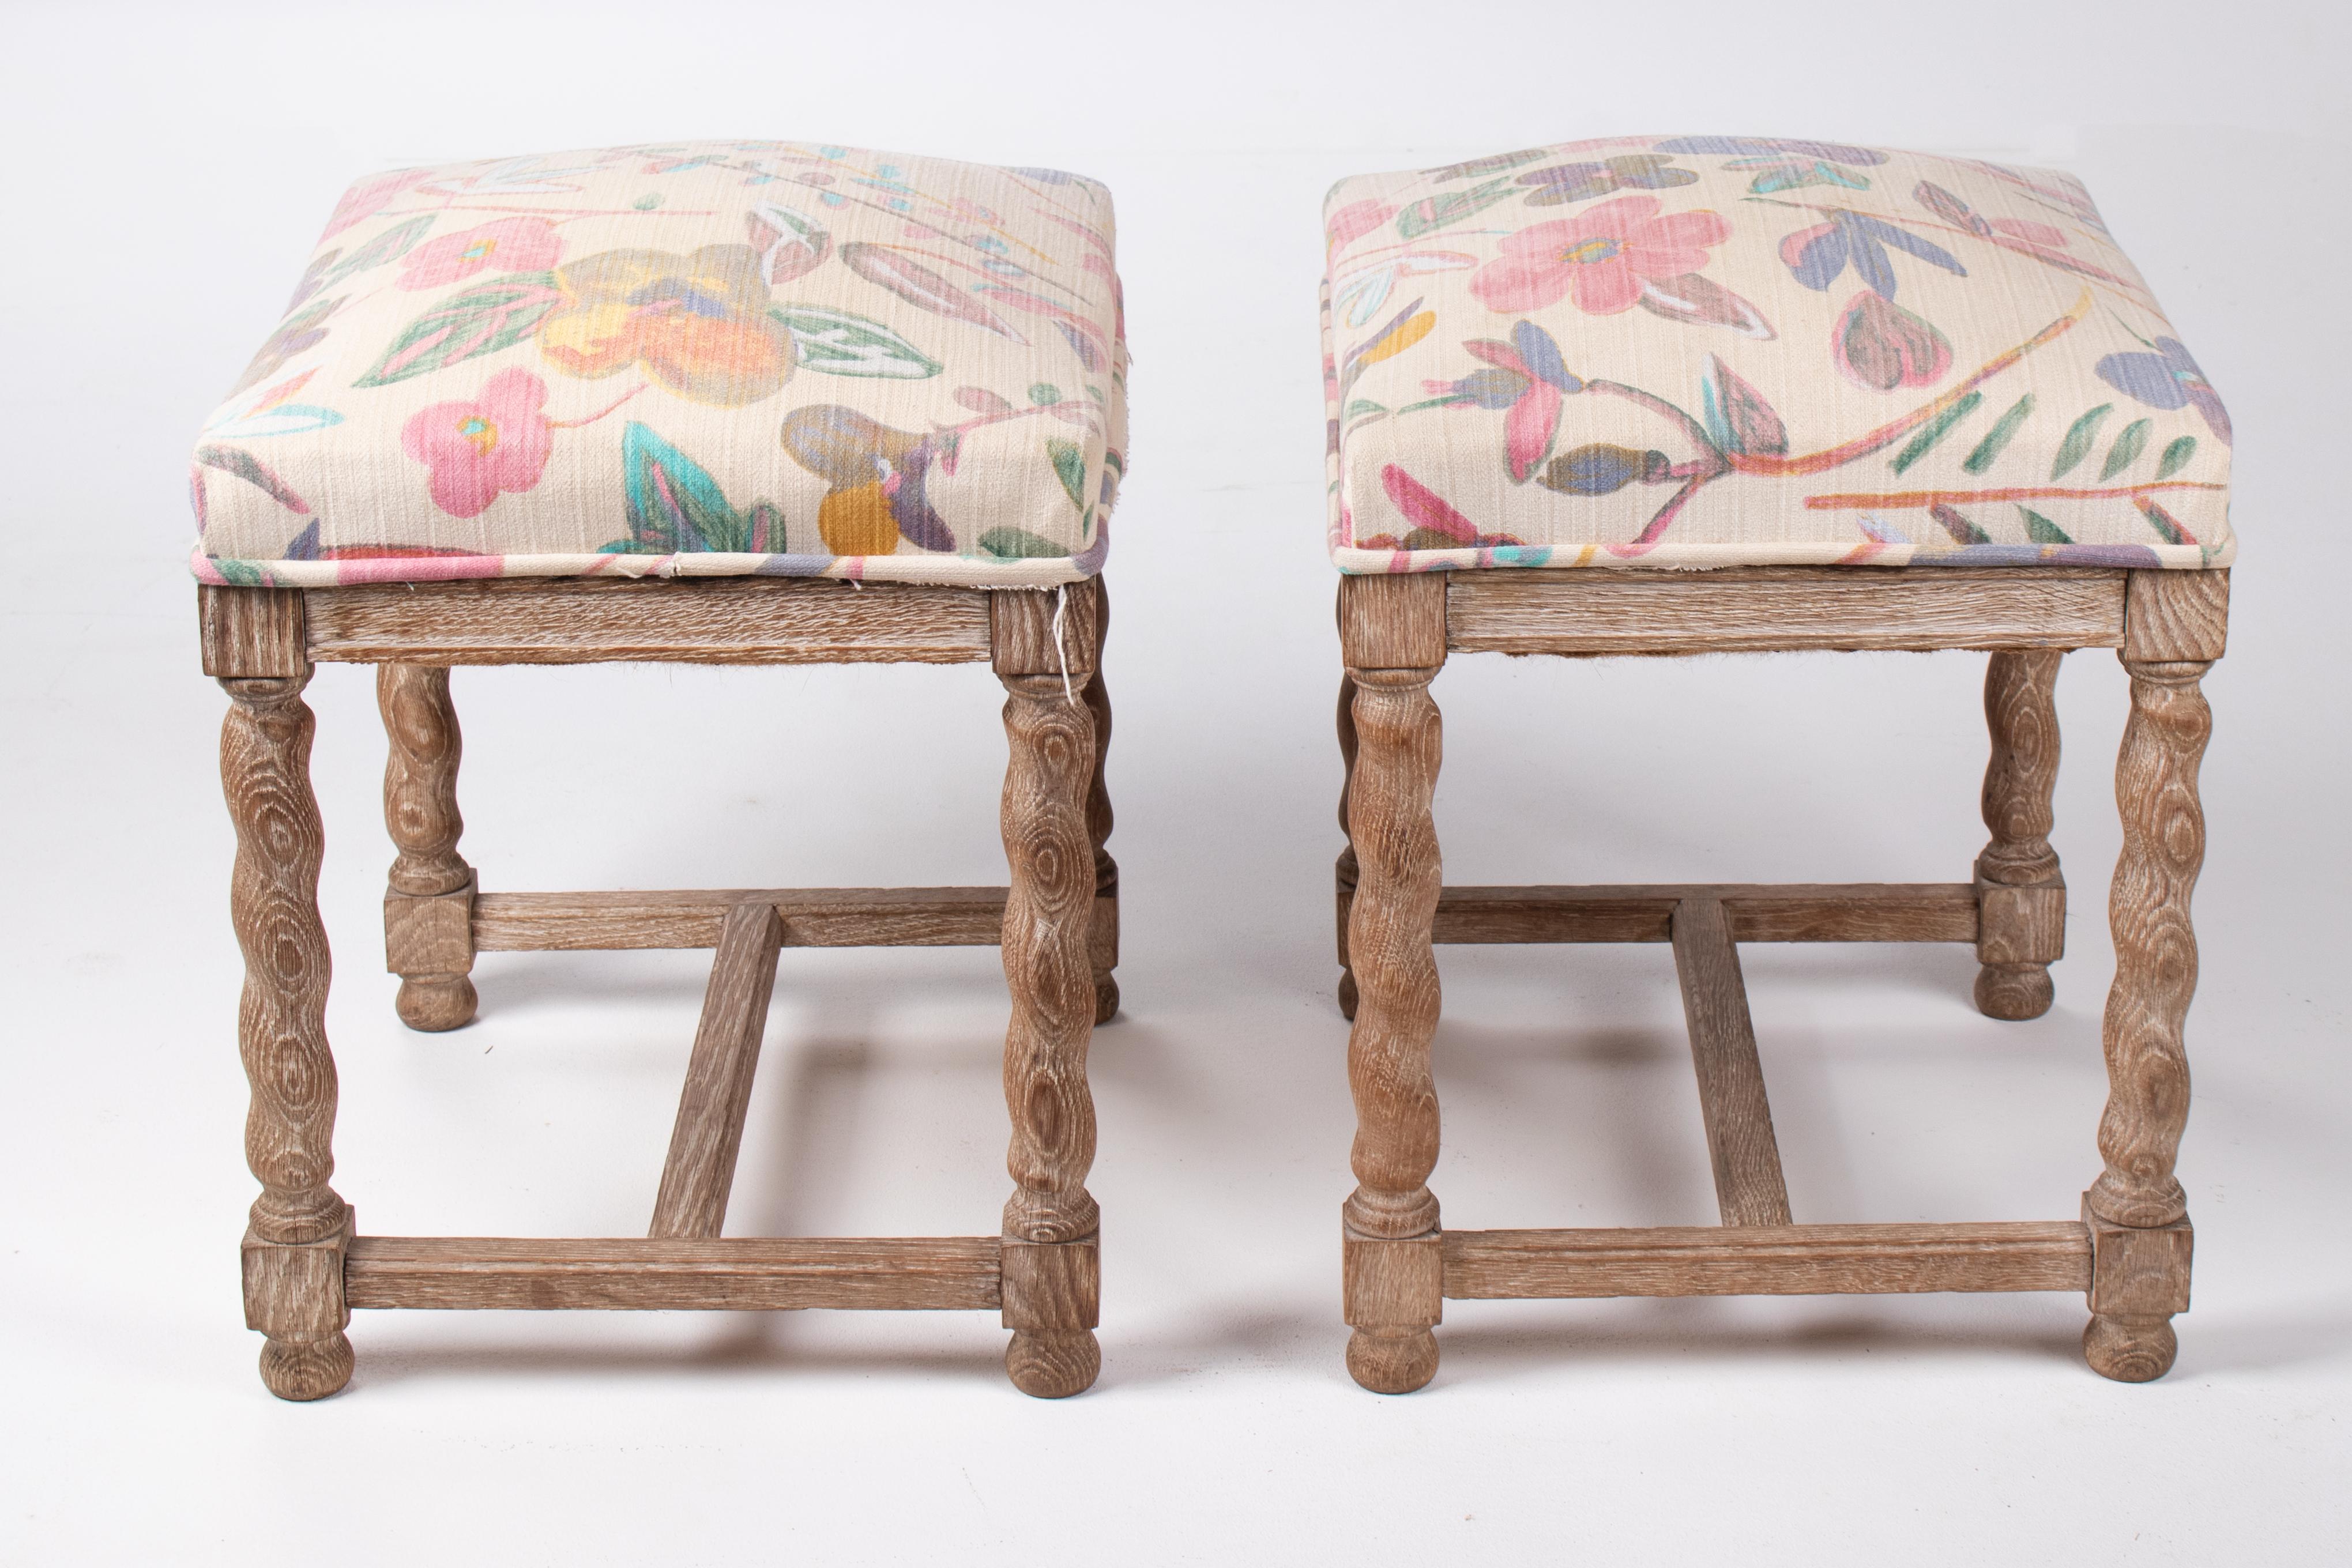 20th Century Pair of French Style Carved Wooden Upholstered Stools in Vintage Flower Pattern